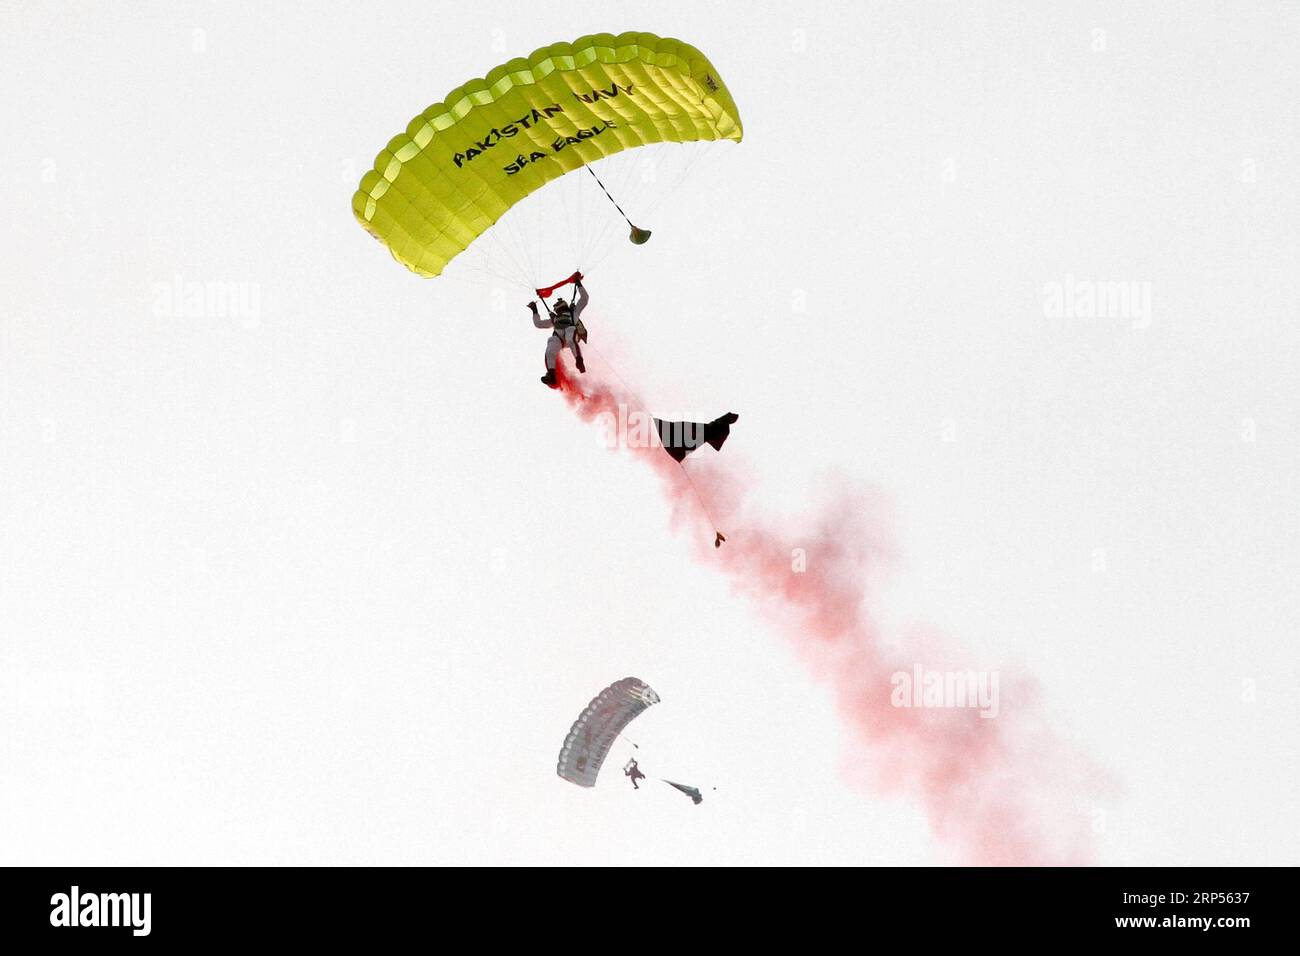 (181129) -- KARACHI (PAKISTAN), Nov. 29, 2018 () -- Pakistani paratroopers perform during an air show in Pakistan s southern port city of Karachi, on Nov. 29, 2018. Pakistan s armed forces presented an air show and anti-terrorism demonstration in Karachi as part of the 10th edition of the International Defense Exhibition and Seminar (IDEAS-2018). (/Stringer) PAKISTAN-KARACHI-AIR SHOW Xinhua PUBLICATIONxNOTxINxCHN Stock Photo